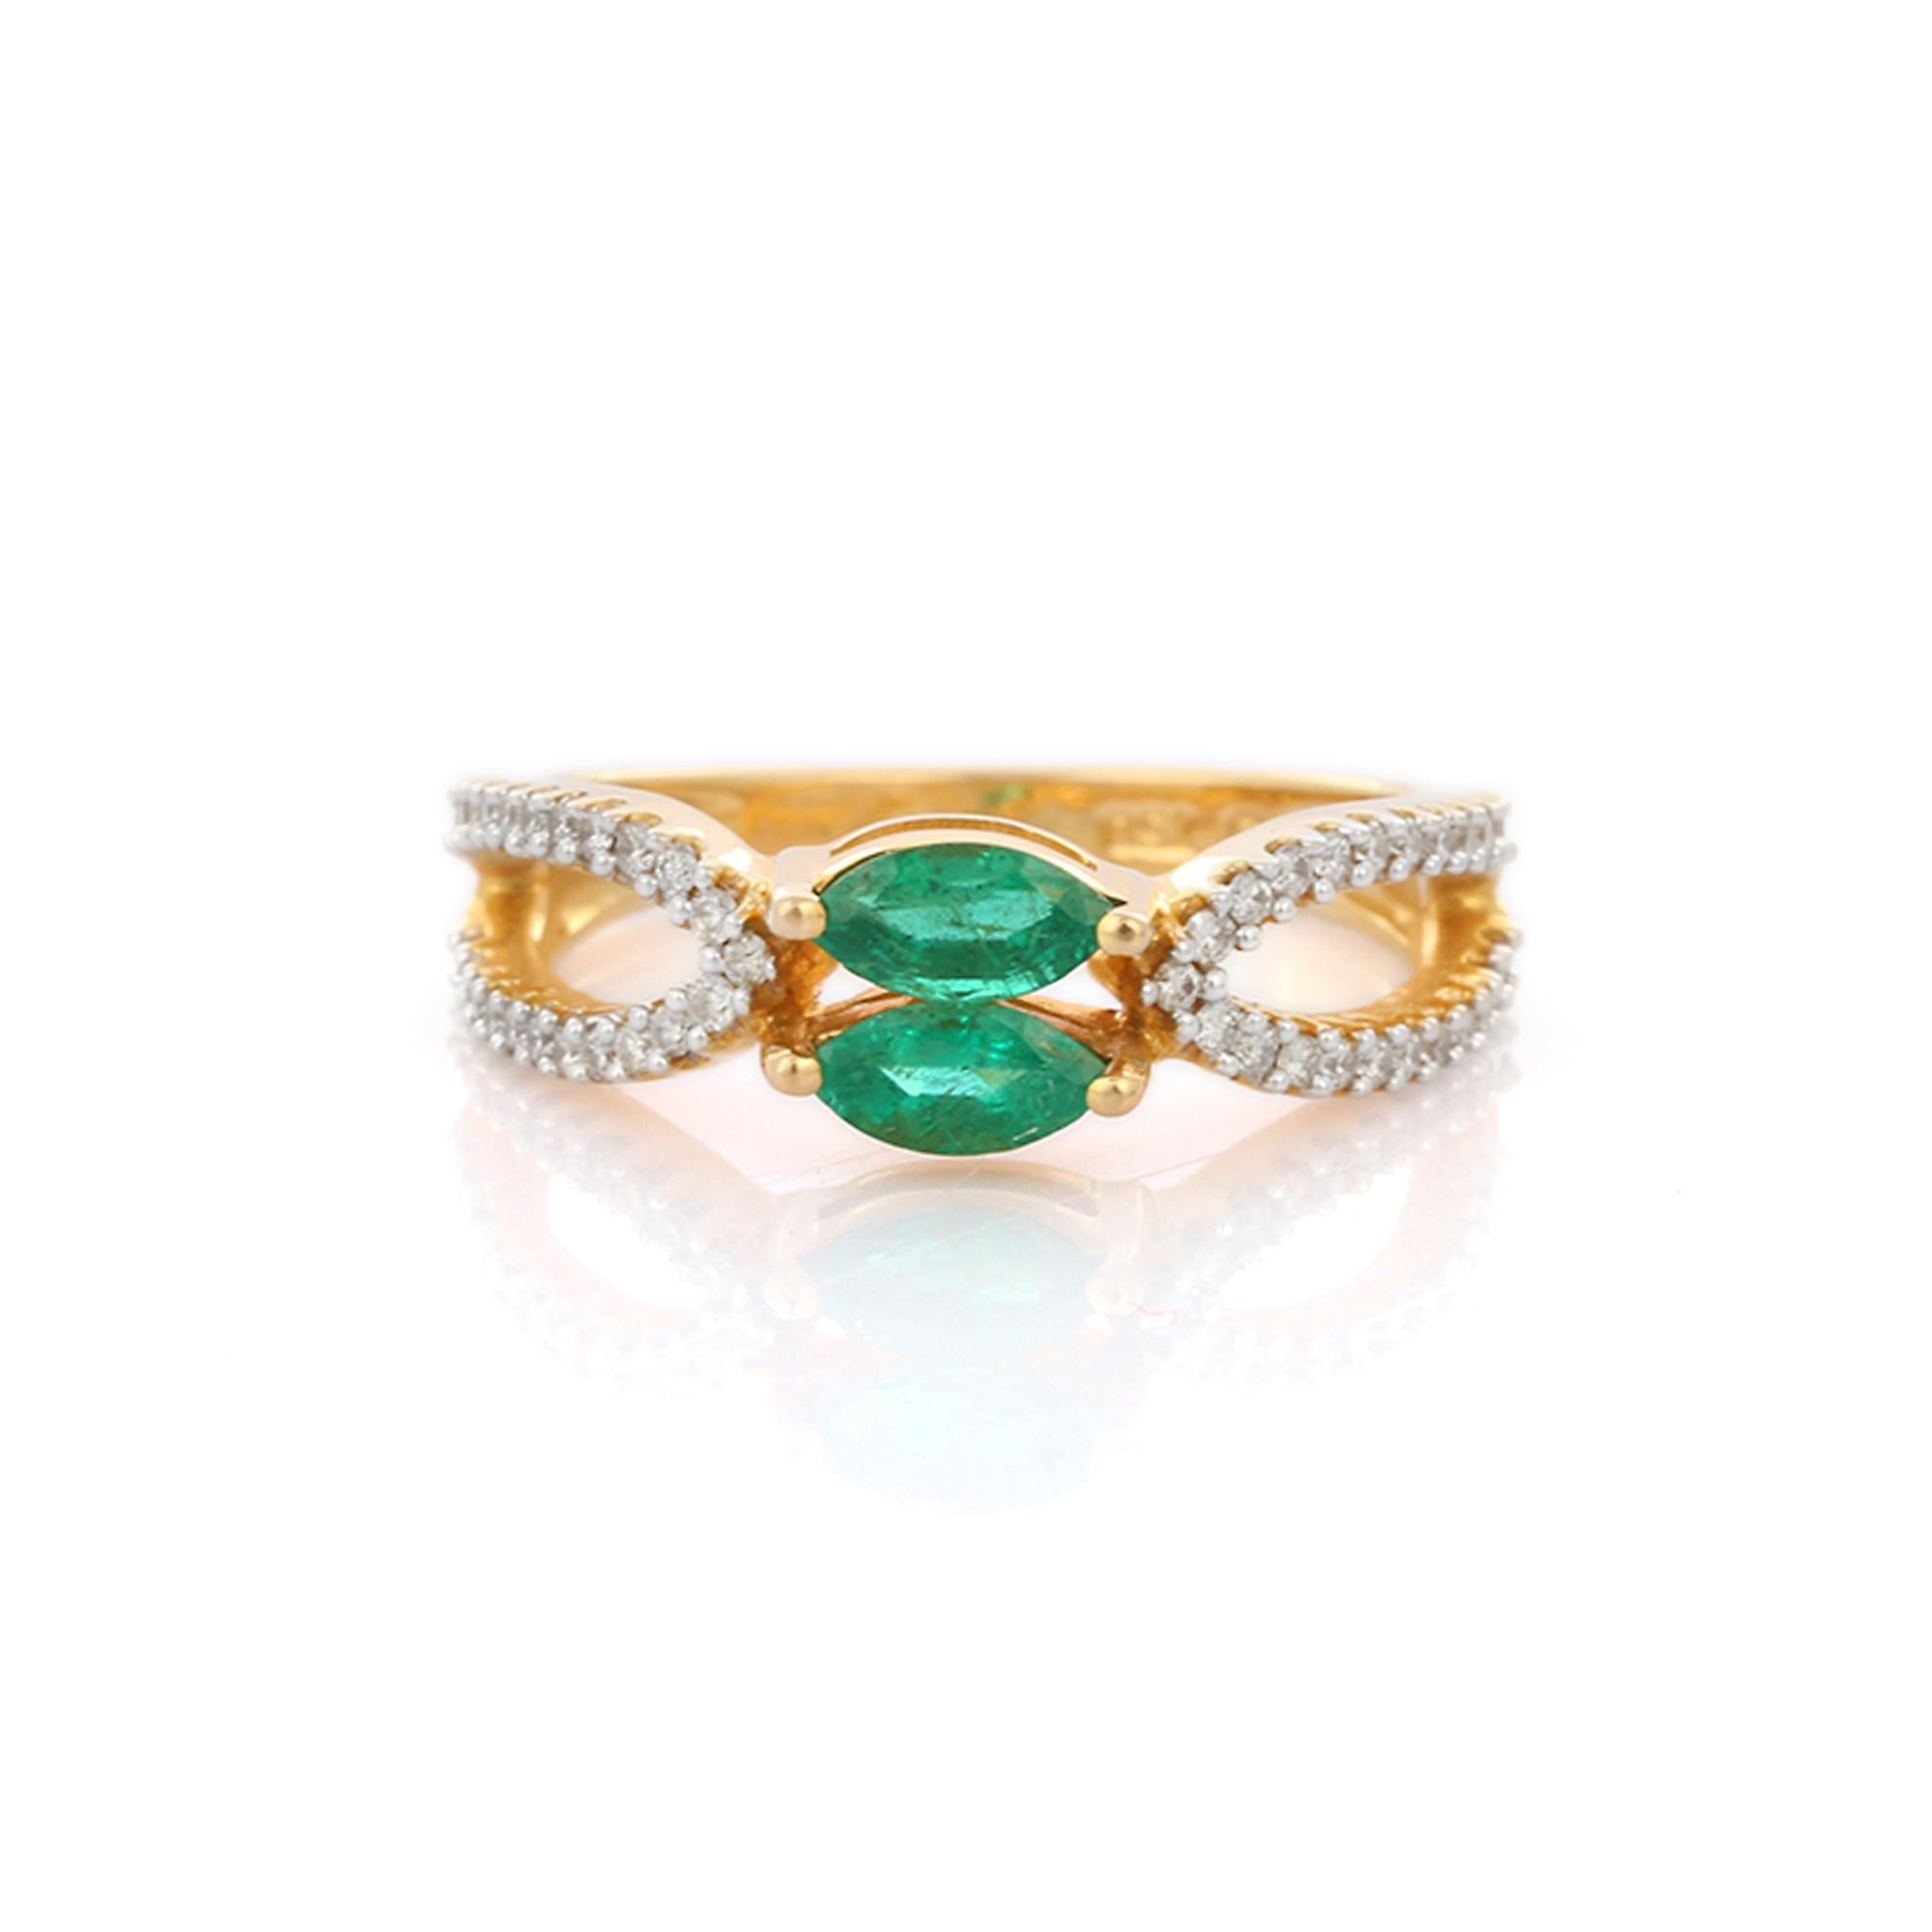 For Sale:  Emerald Ring, Diamond Emerald Wedding Ring in 18K Yellow Gold 5